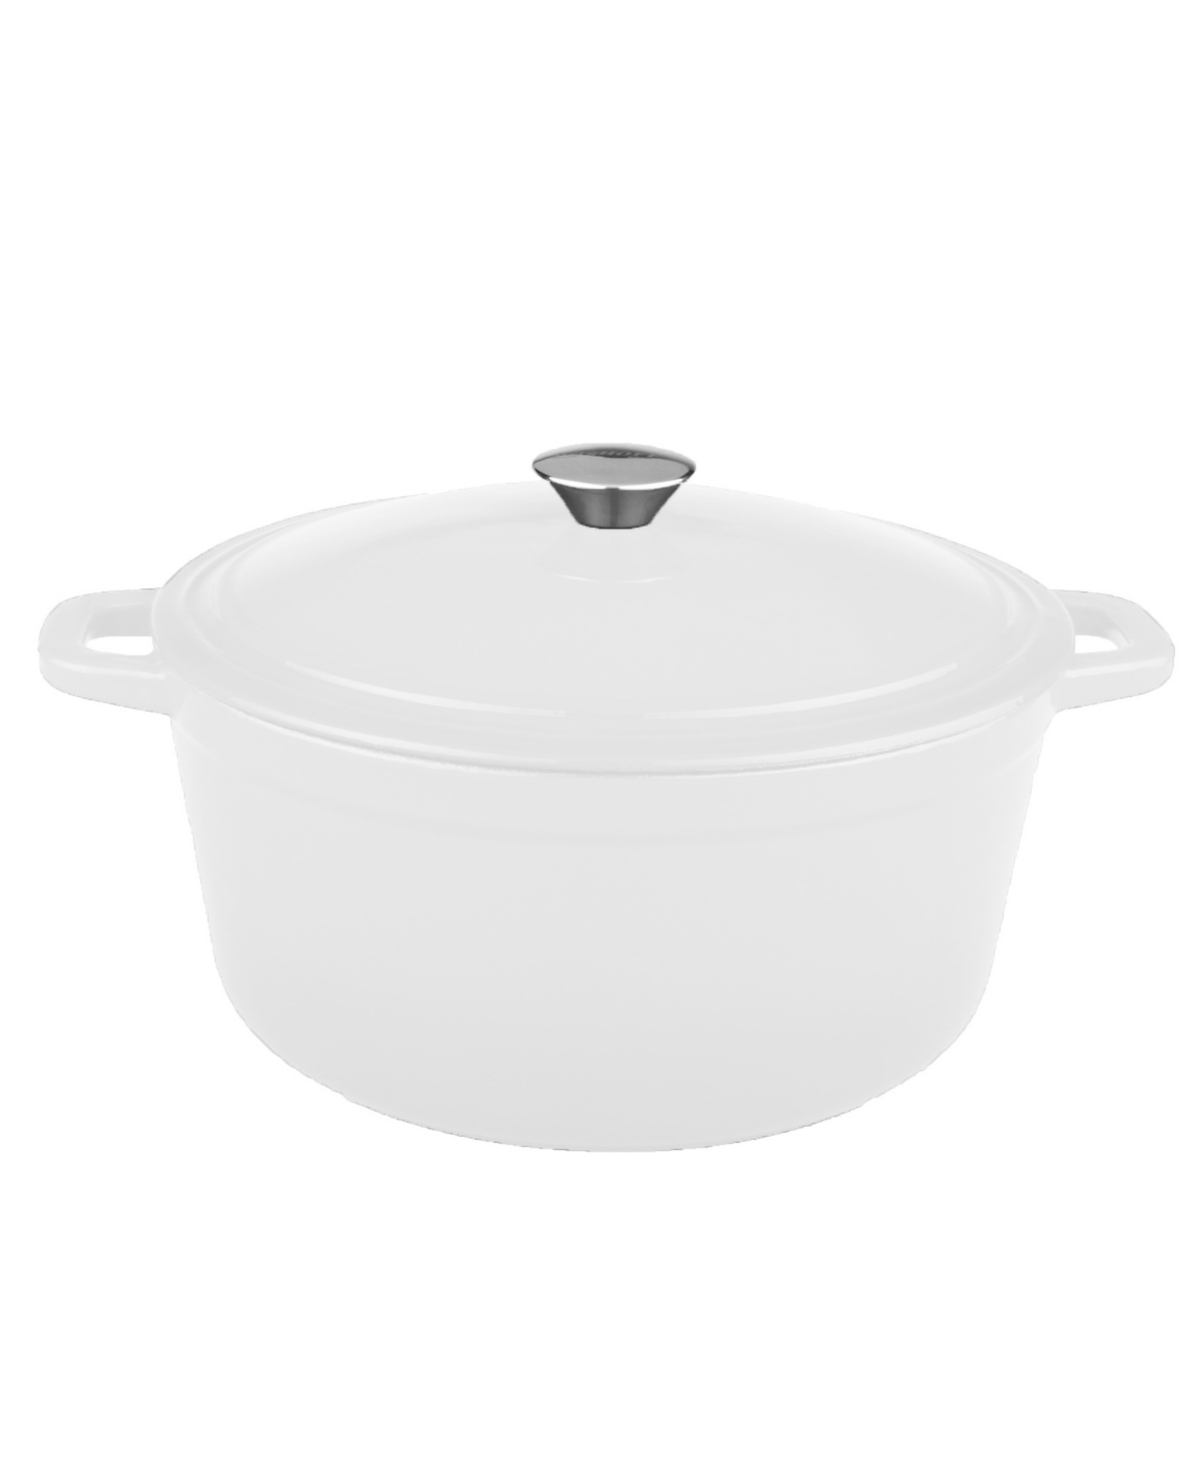 BergHOFF Neo Collection Cast Iron 5-Qt. Oval Covered Casserole